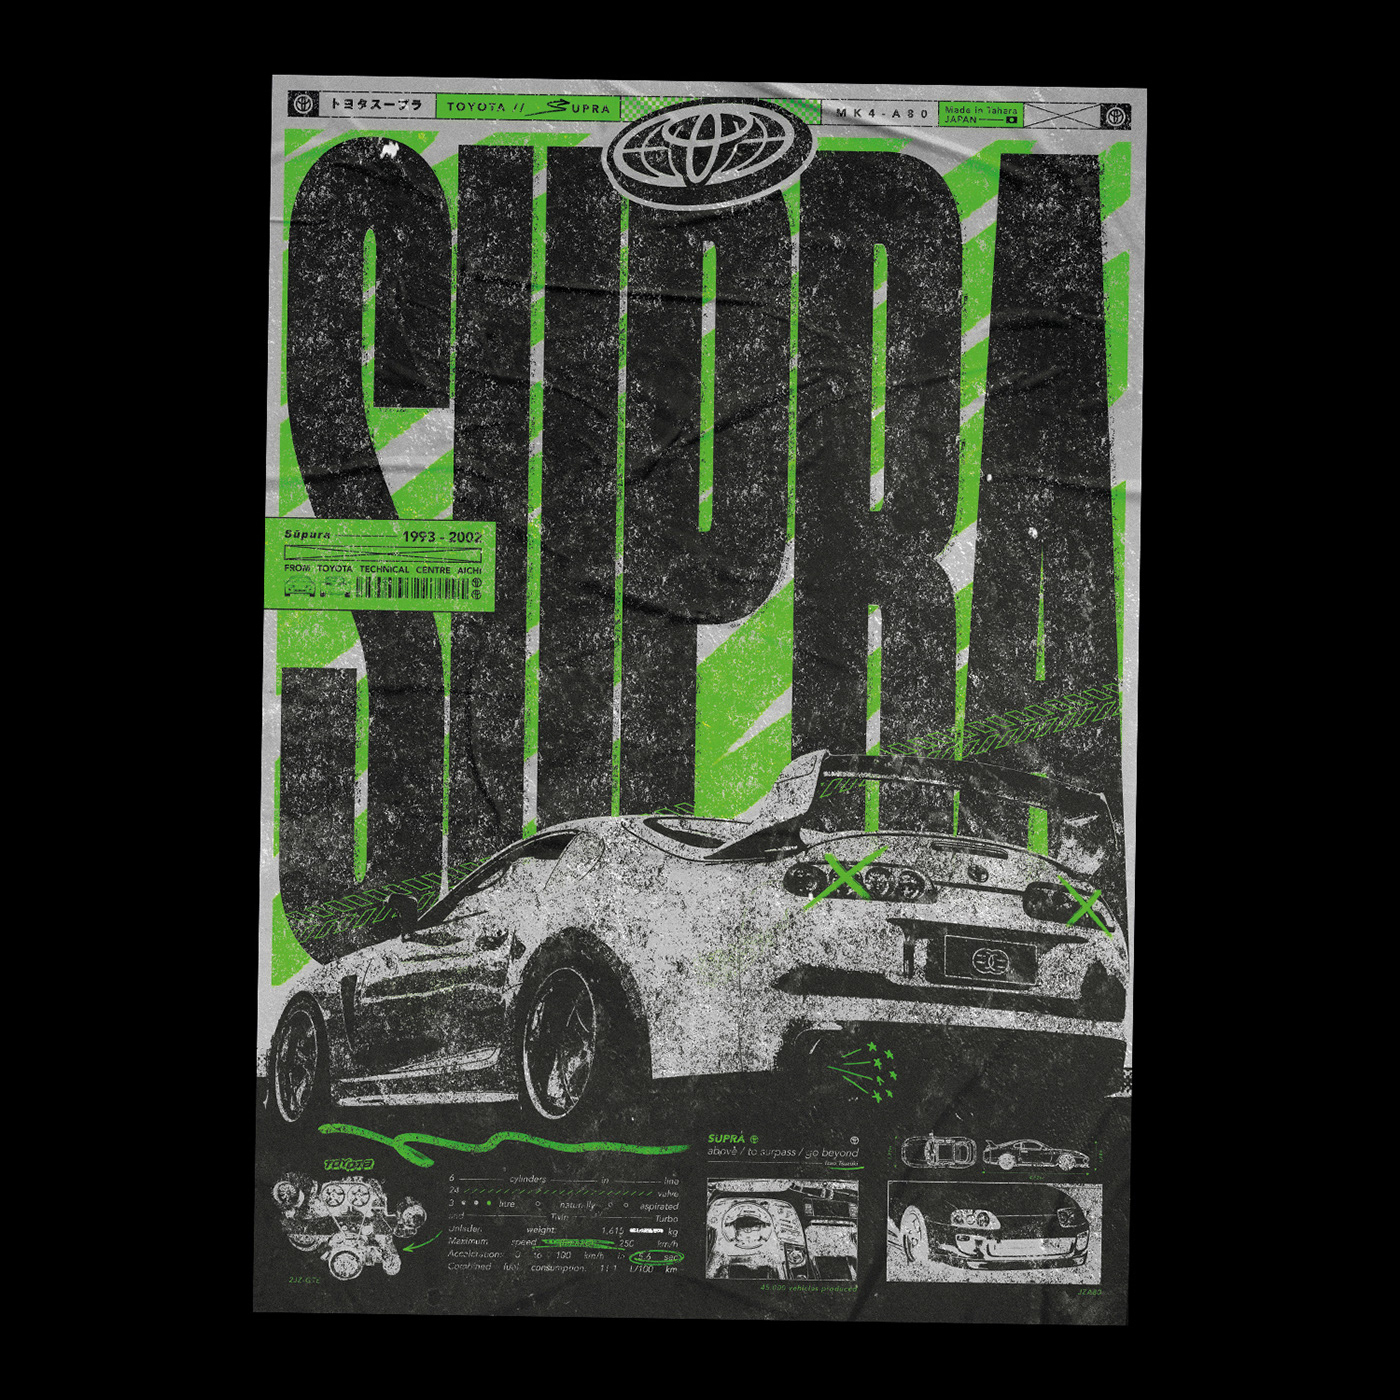 A print poster design render of a toyota supra racing car in a brutalism style.